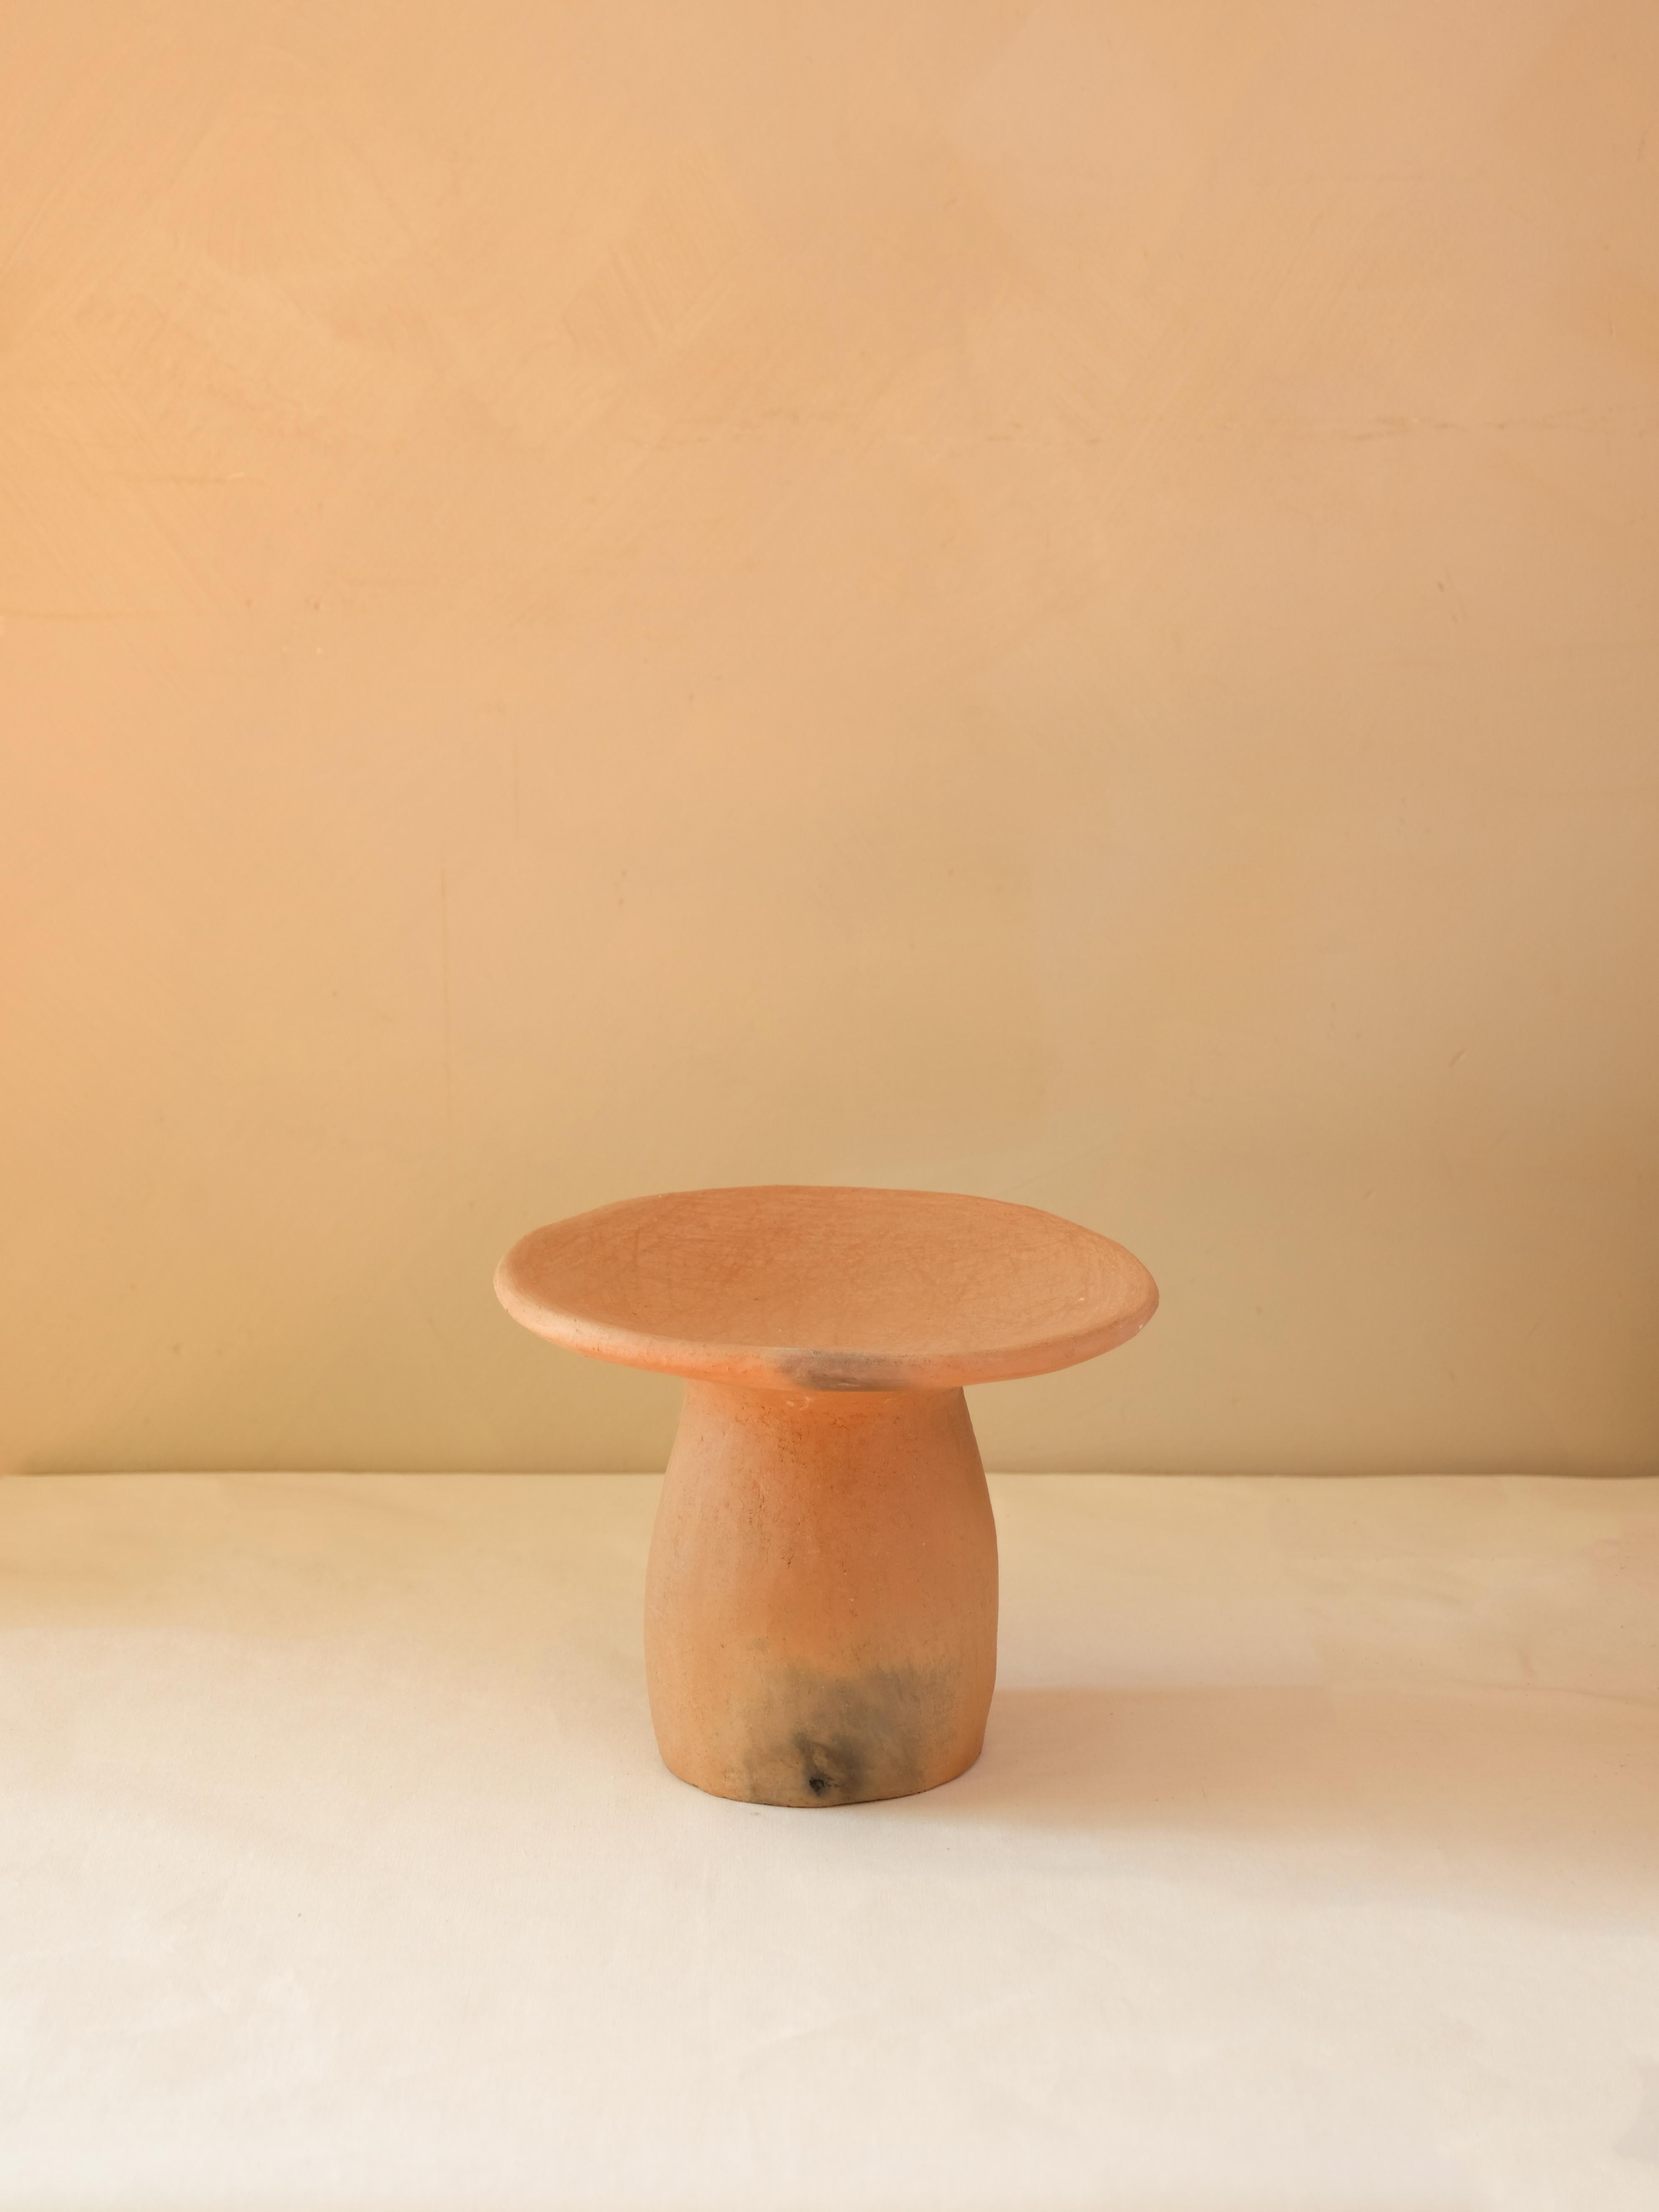 Contemporary Terracotta contemporary Side Table Made of Clay, Handcrafted by the Potter Houda For Sale